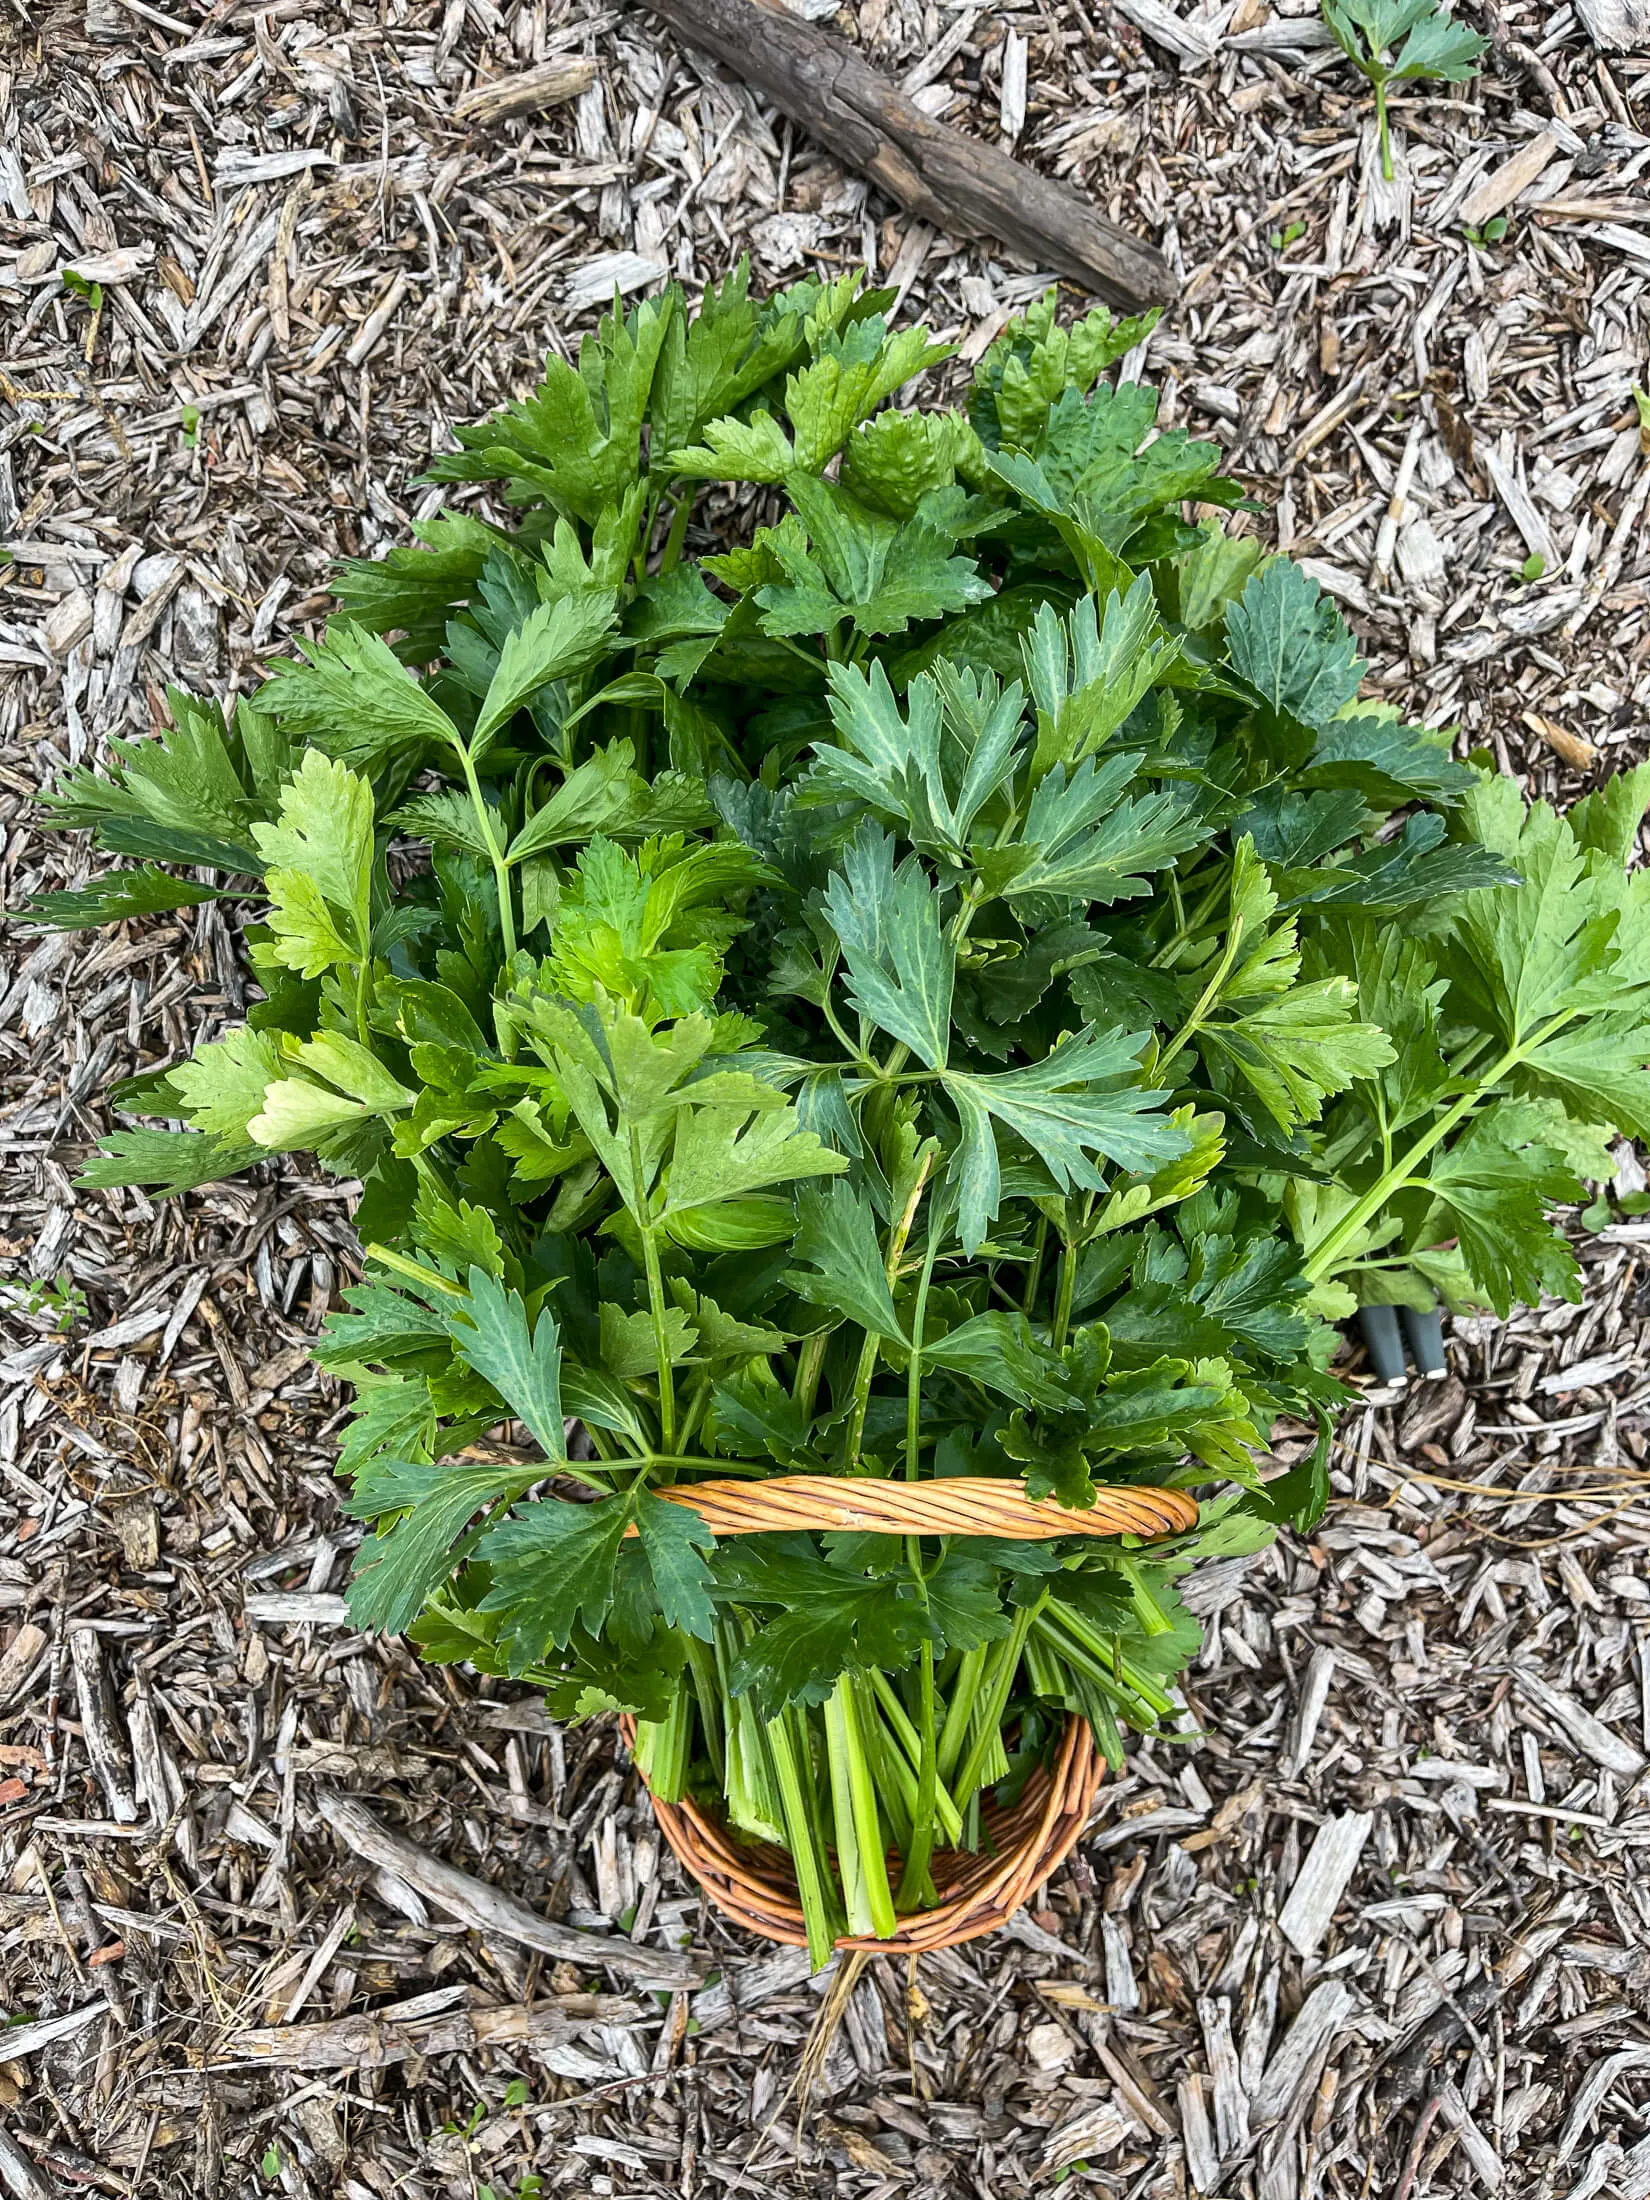 Basket overflowing with celery. 